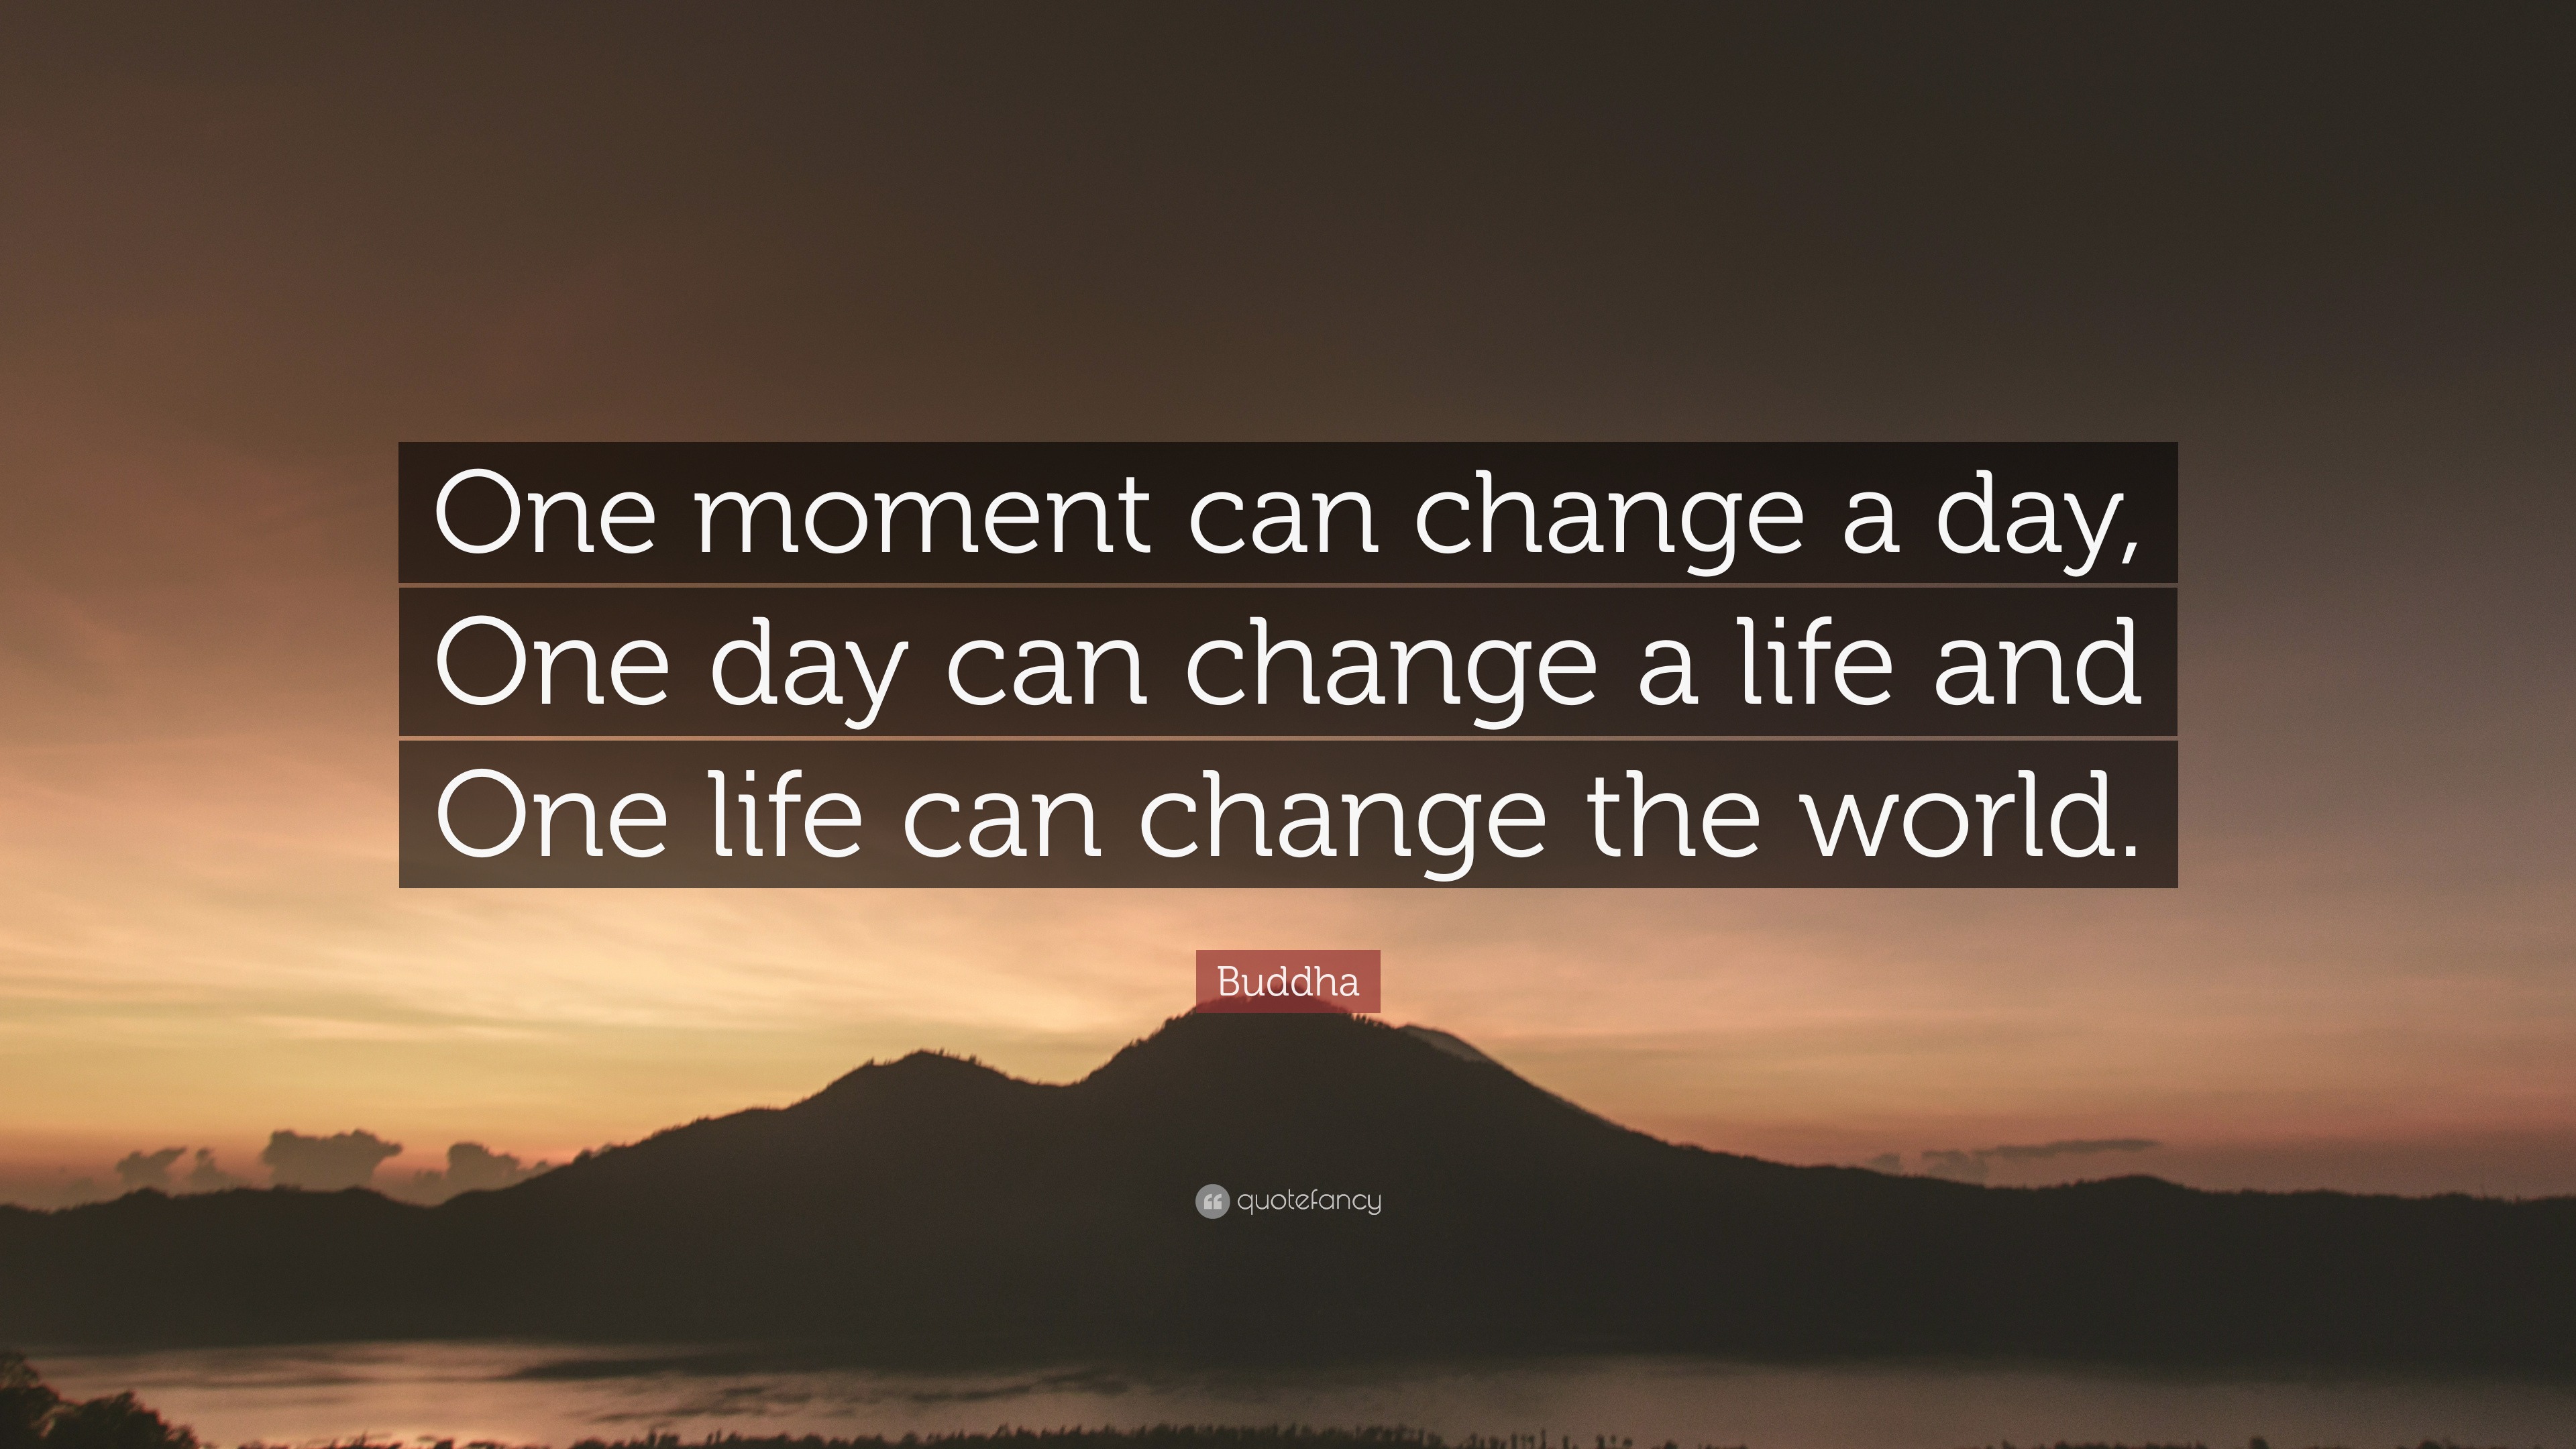 Buddha Quote “One moment can change a day One day can change a life and One life can change